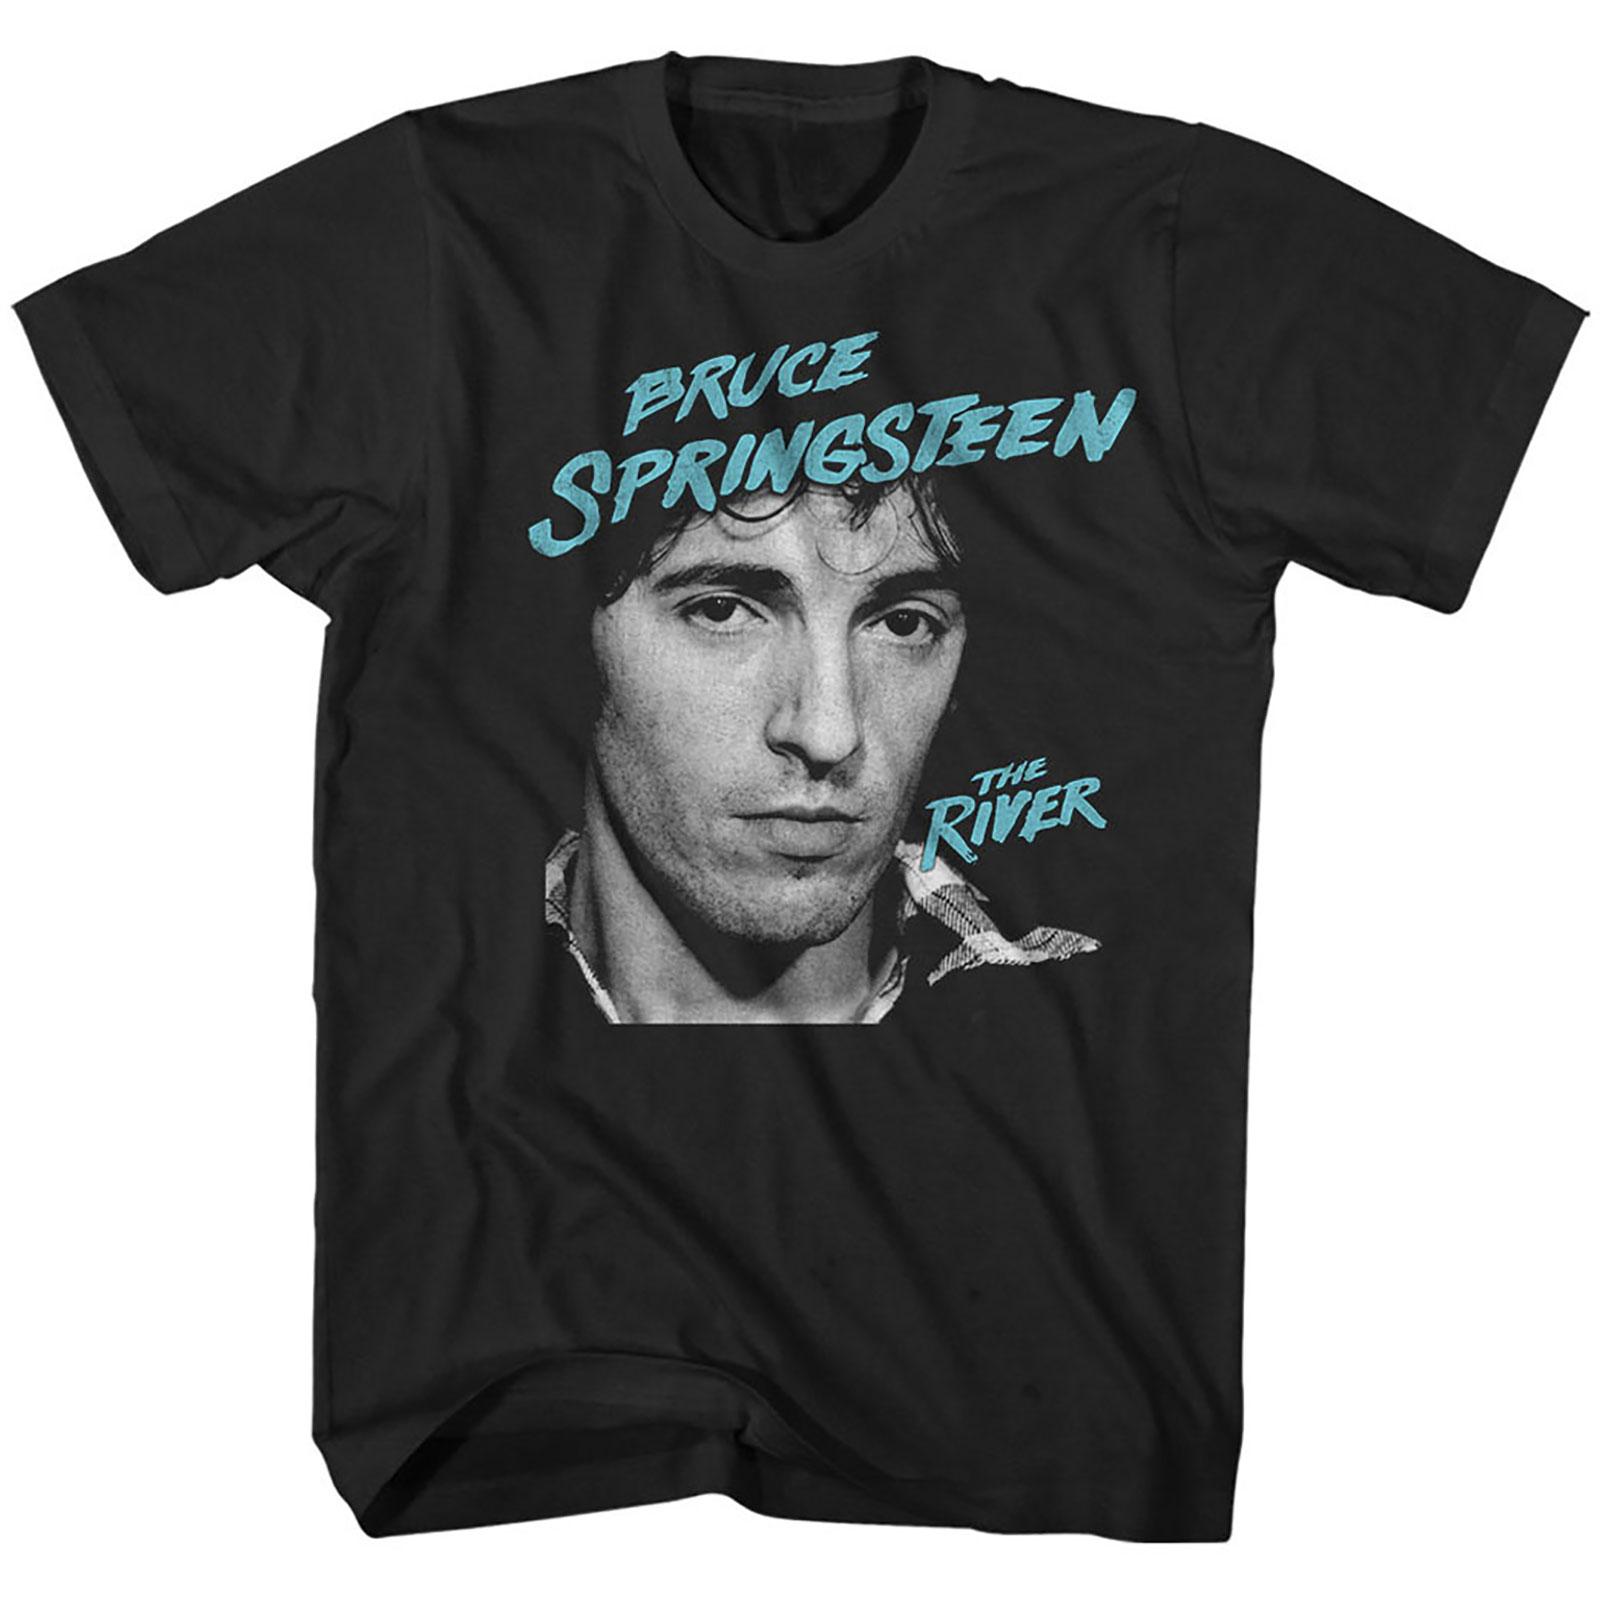 T-shirt Bruce Springsteen the river